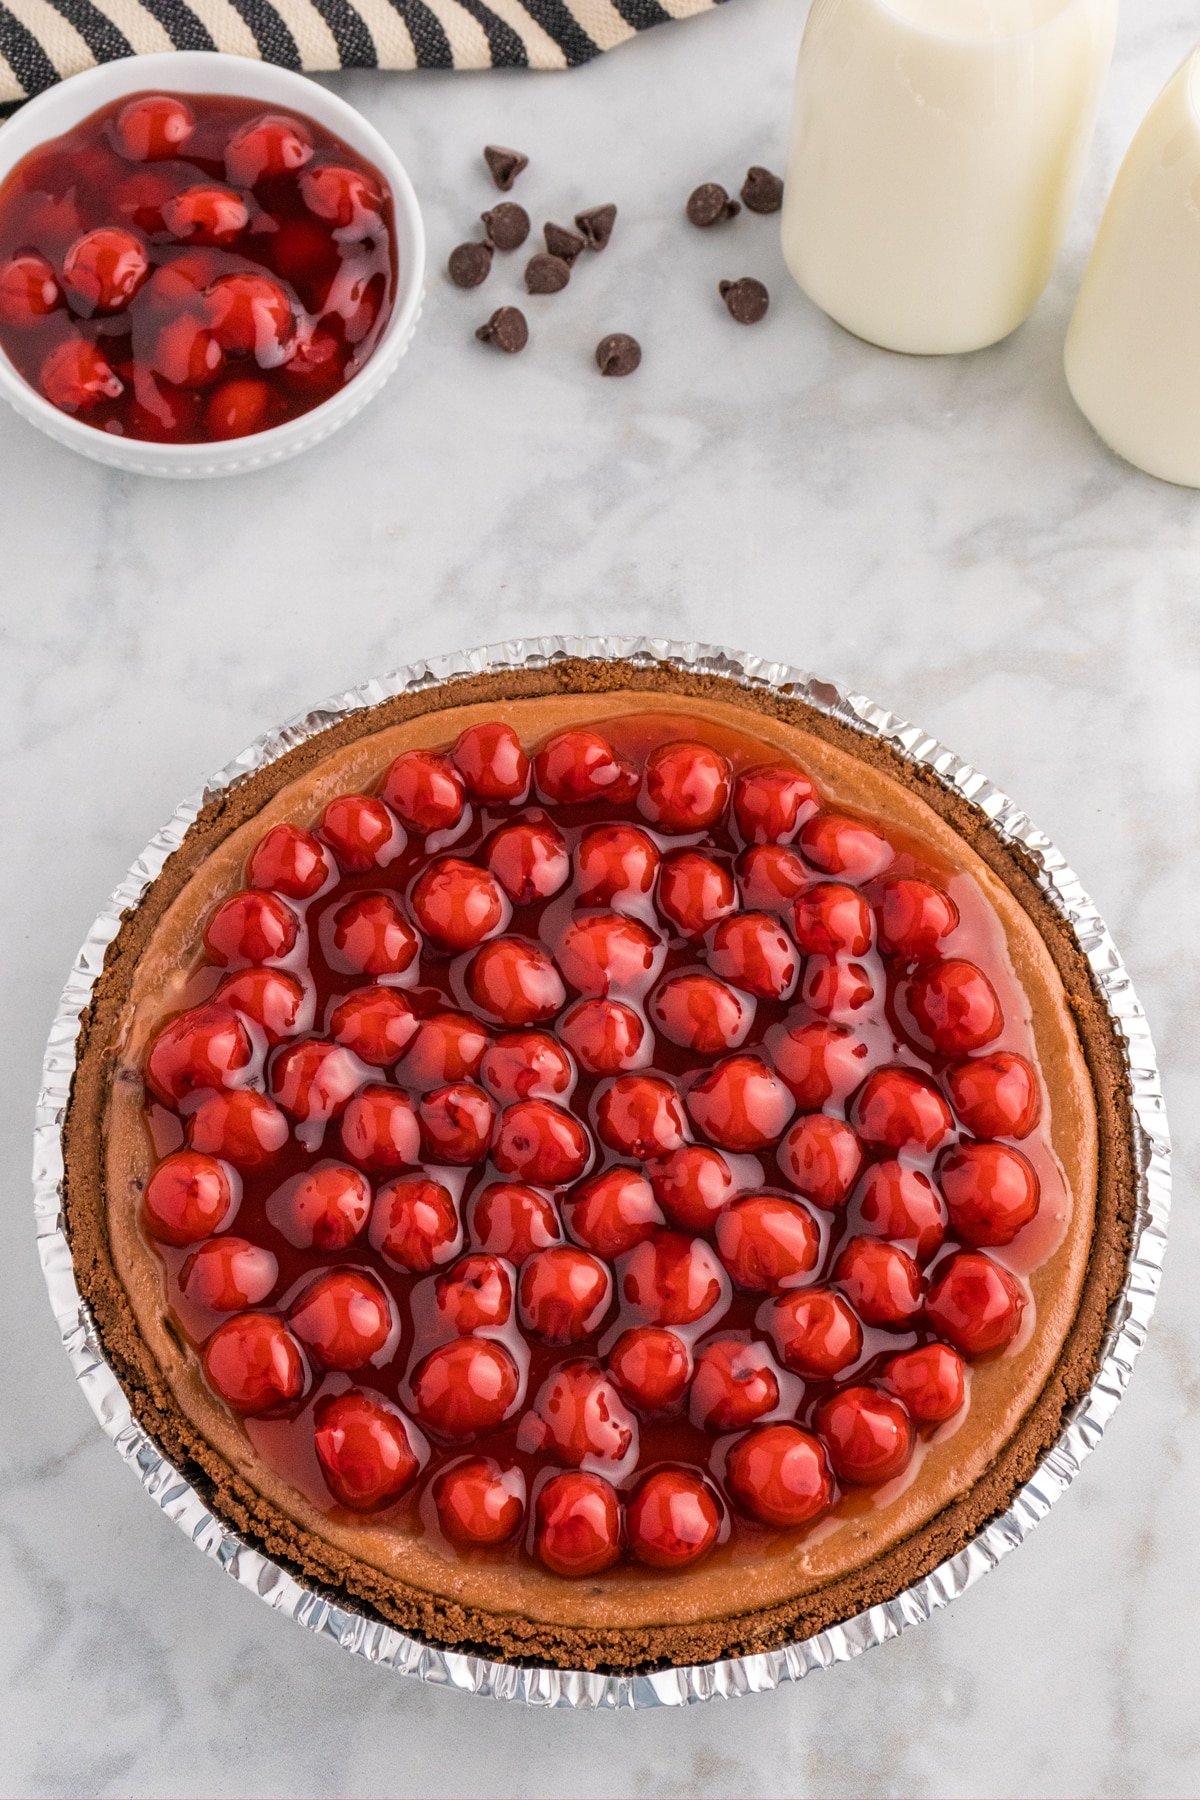 When the Chocolate Cherry Cheesecake is baked, add cherry topping on it.